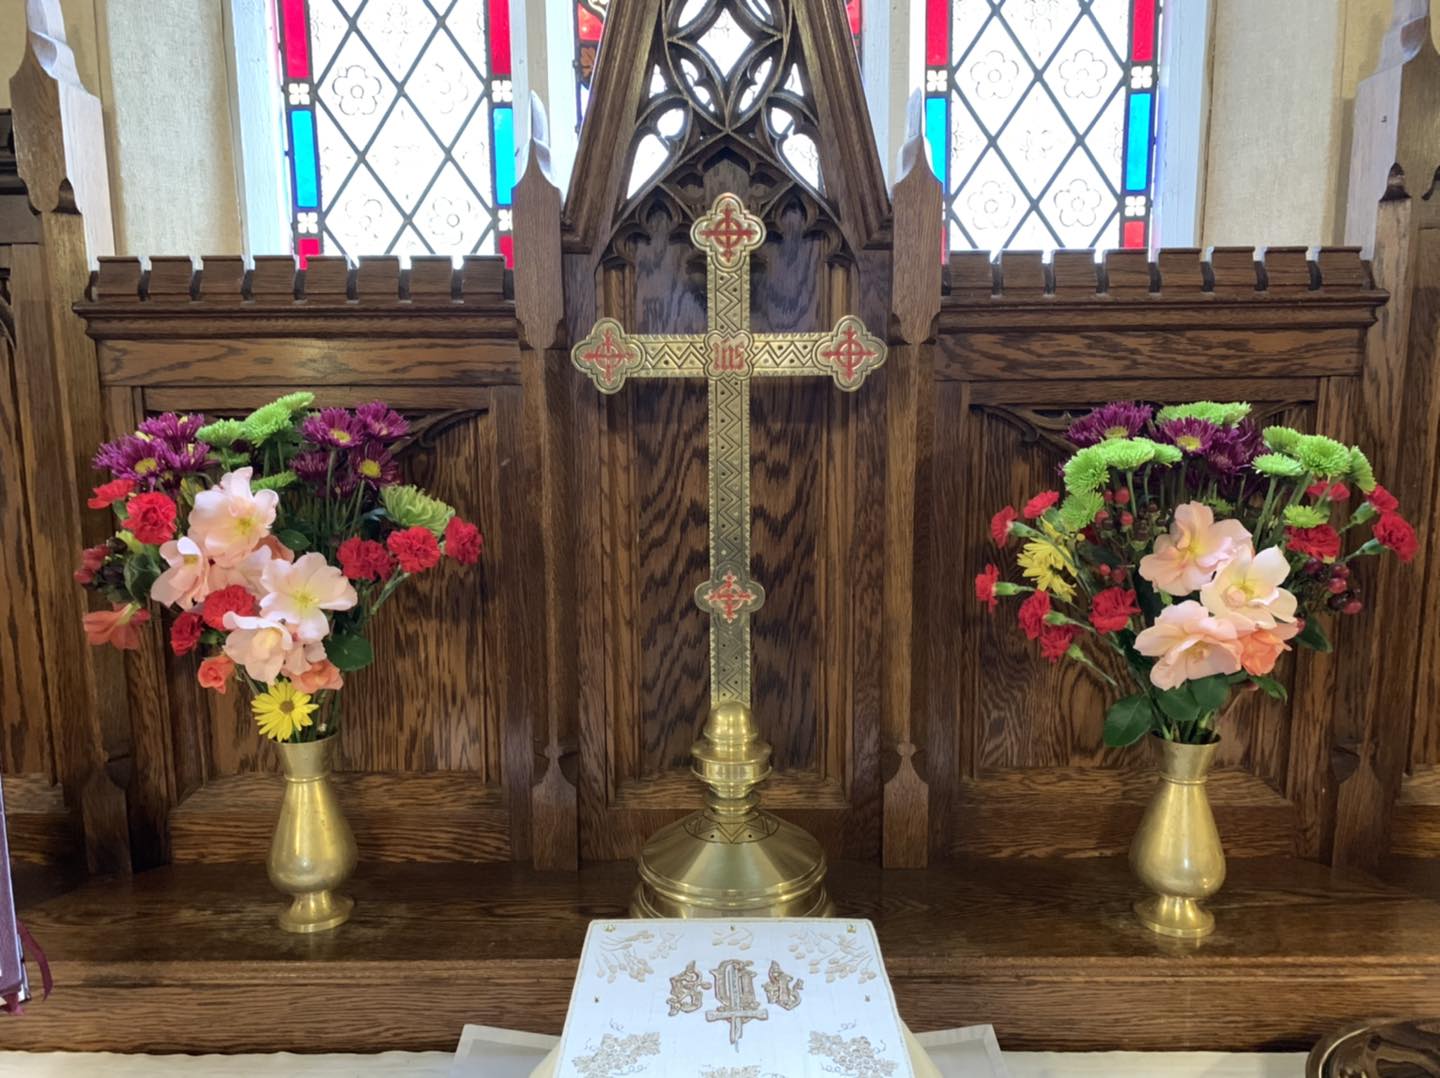 Sunday, October 2nd, 2022- Flowers on the Altar are in loving memory of Bill Grant; a special husband, father and grandfather.